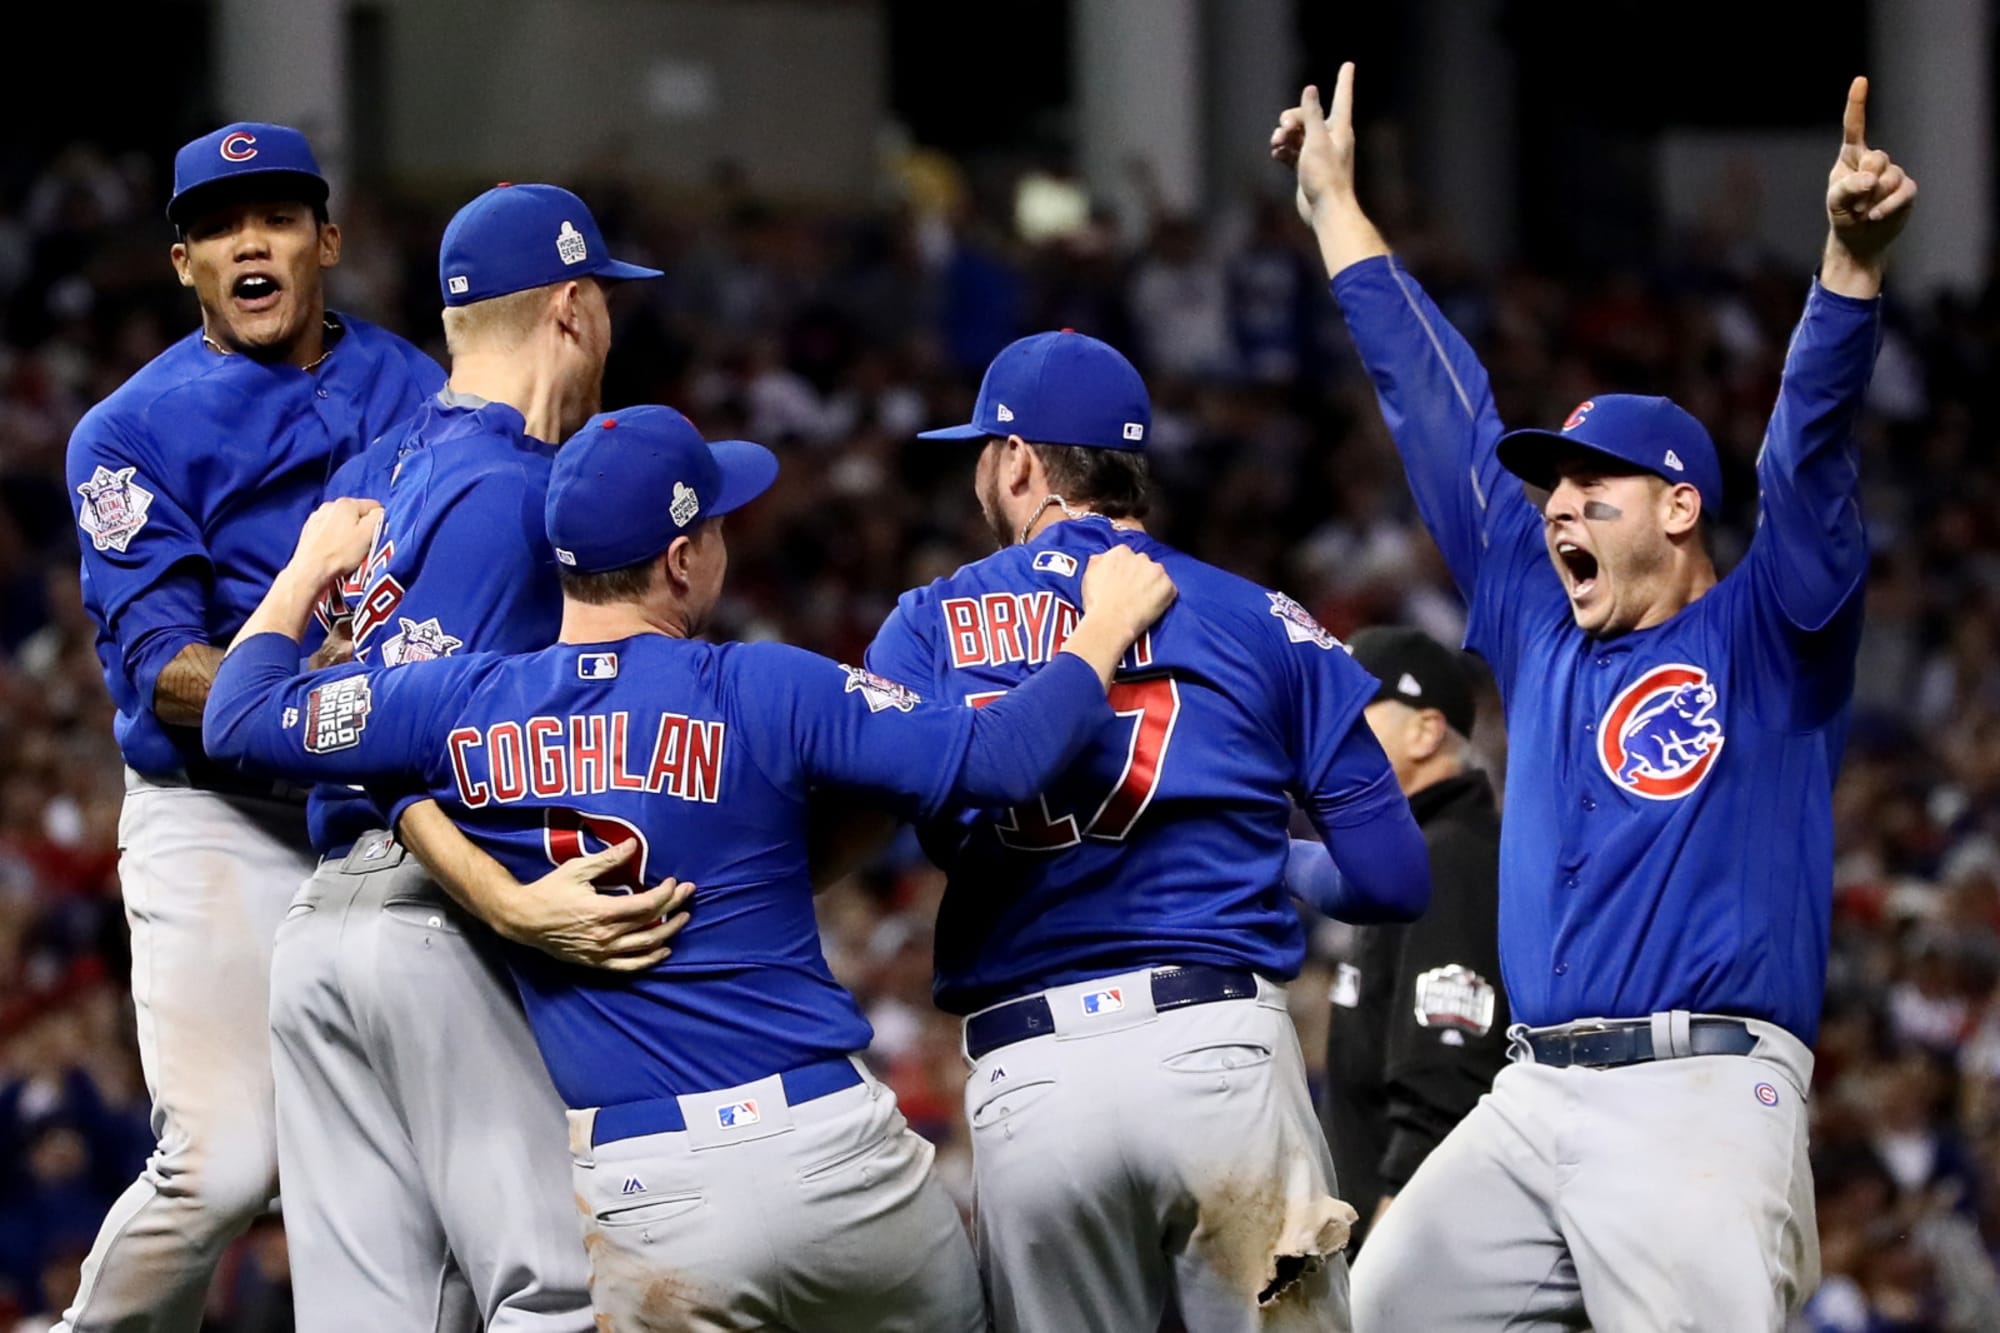 Chicago Cubs: Where does the 2016 team rank among recent champions?